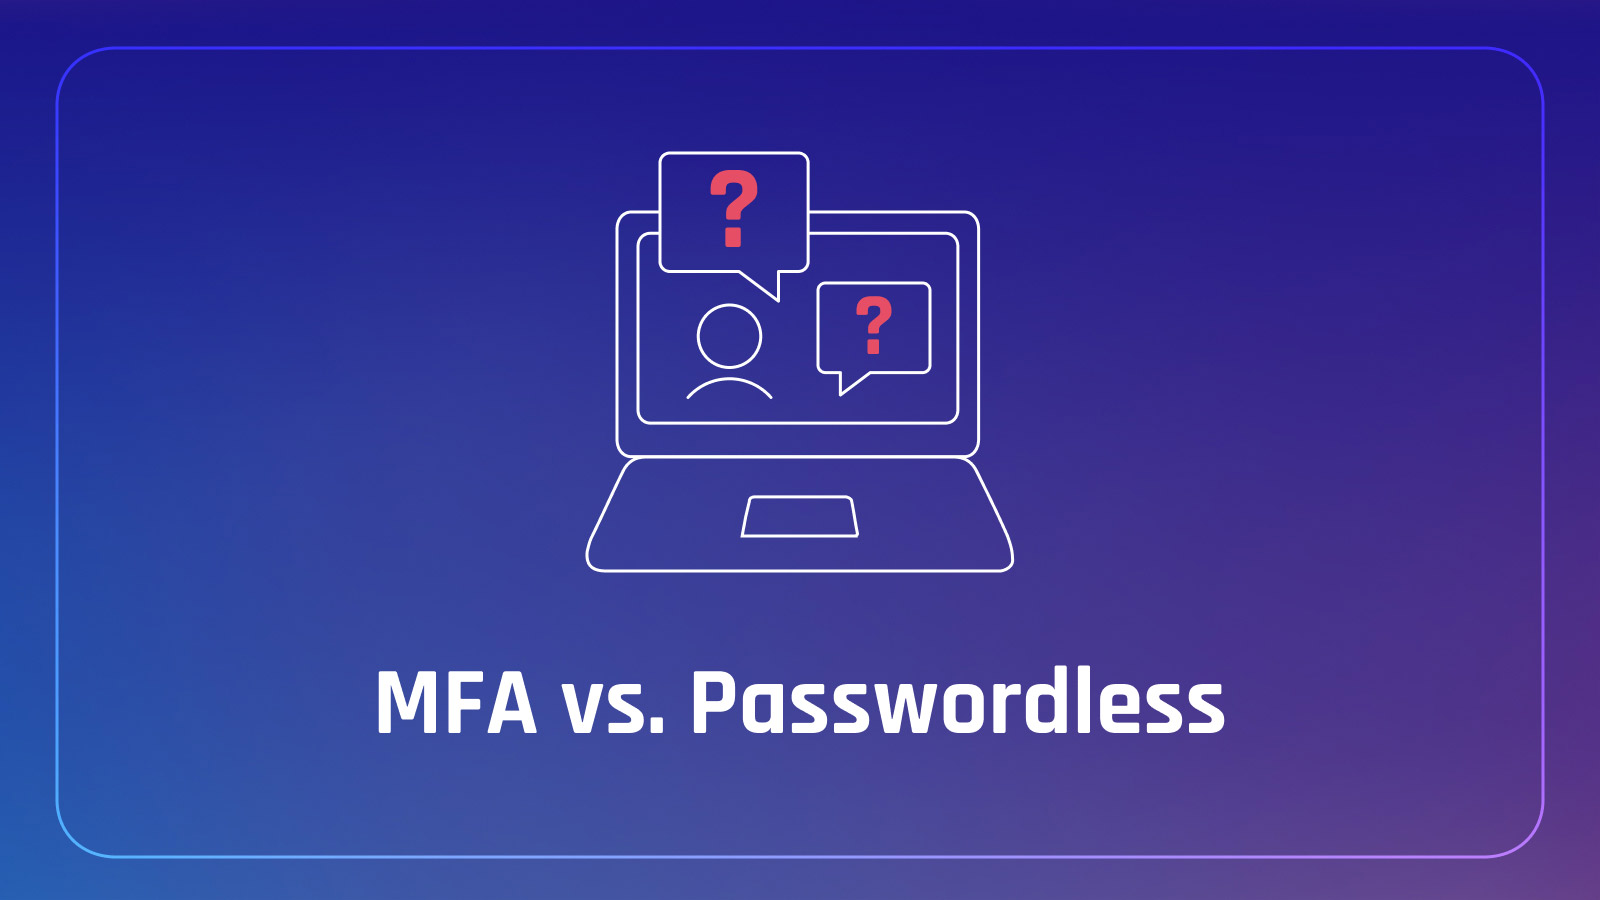 Passwordless vs. MFA: What's the Difference?